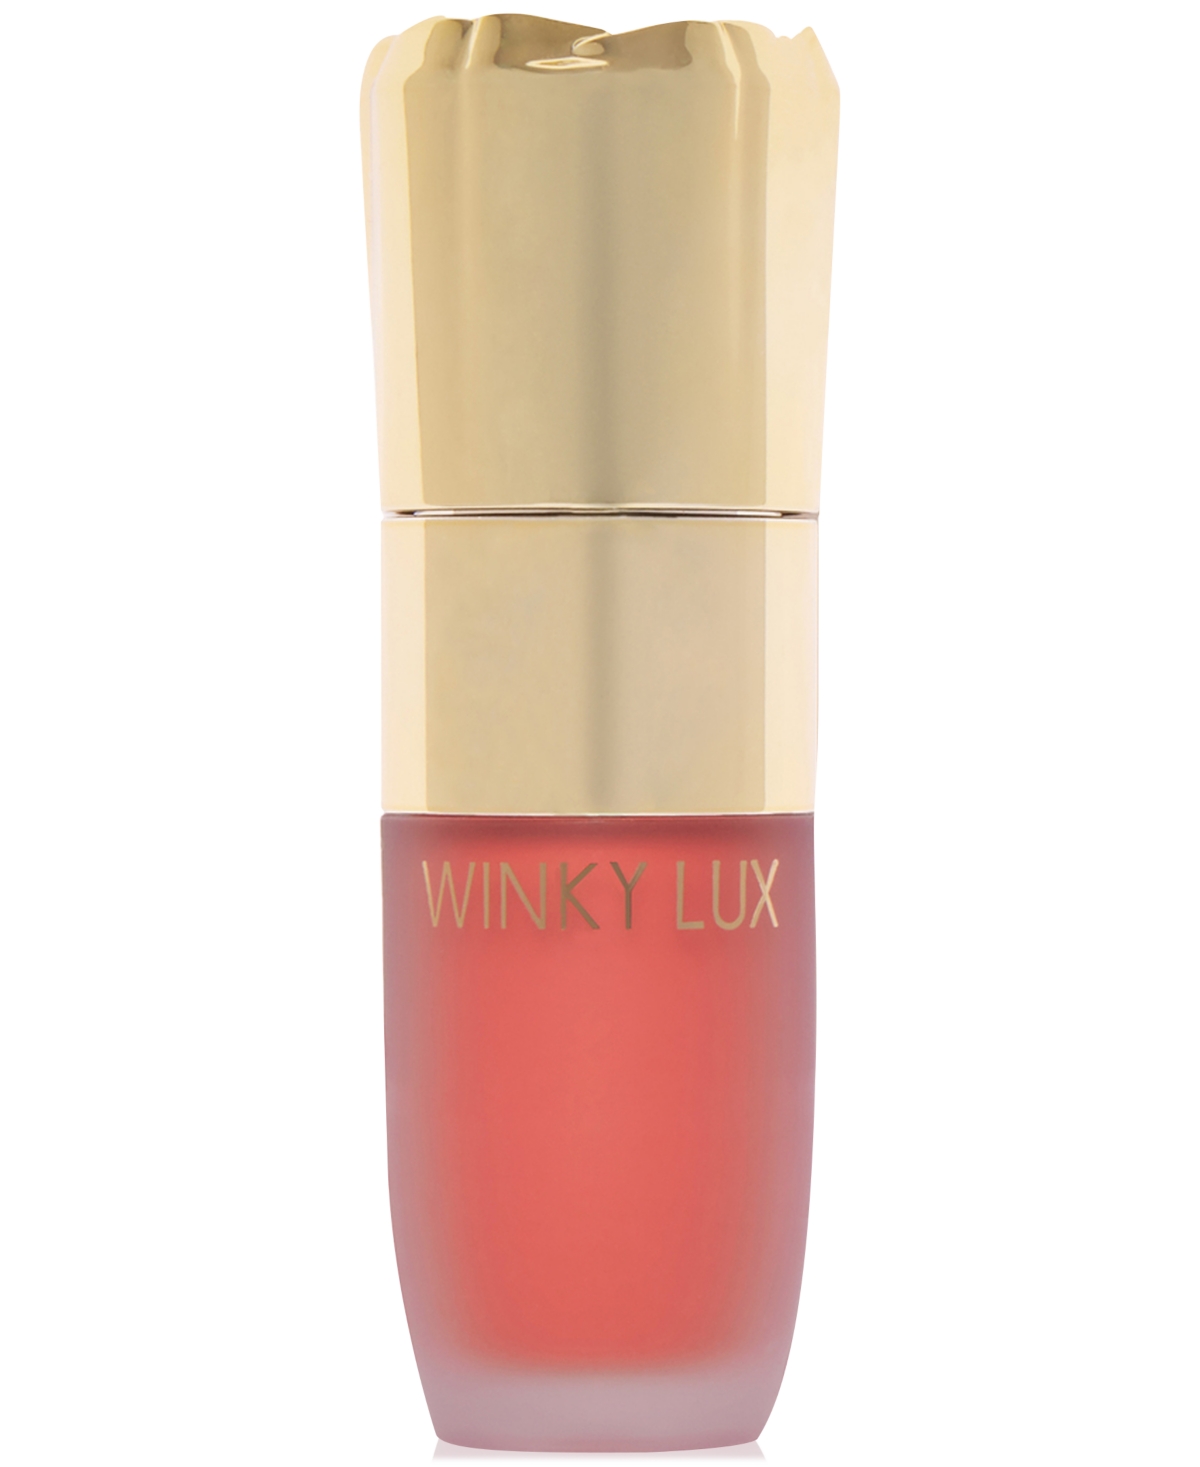 Shop Winky Lux Cheeky Rose Liquid Blush In Darling